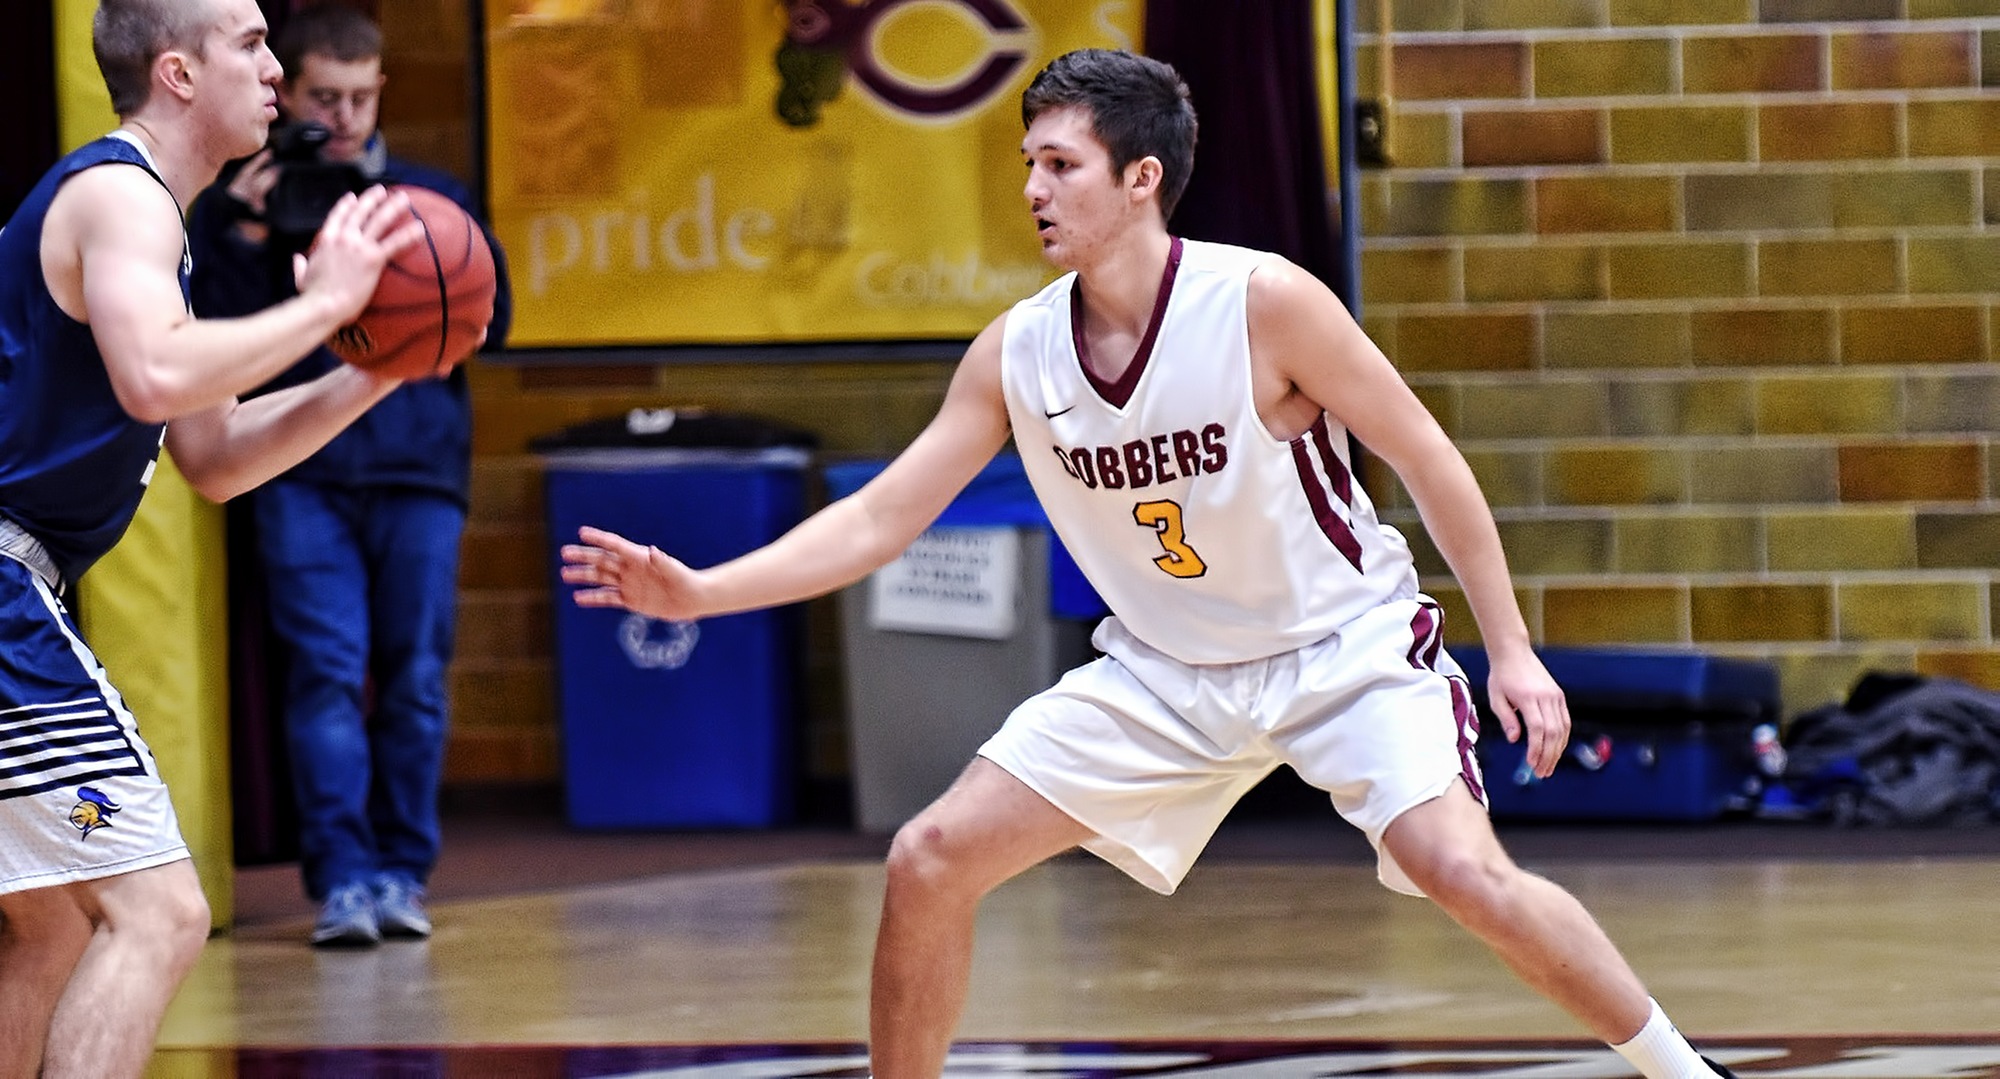 Freshman Braeton Motschenbacher made five 3-pointers in the final 7-minutes of play against Macalester and finished with a career-high 18 points.